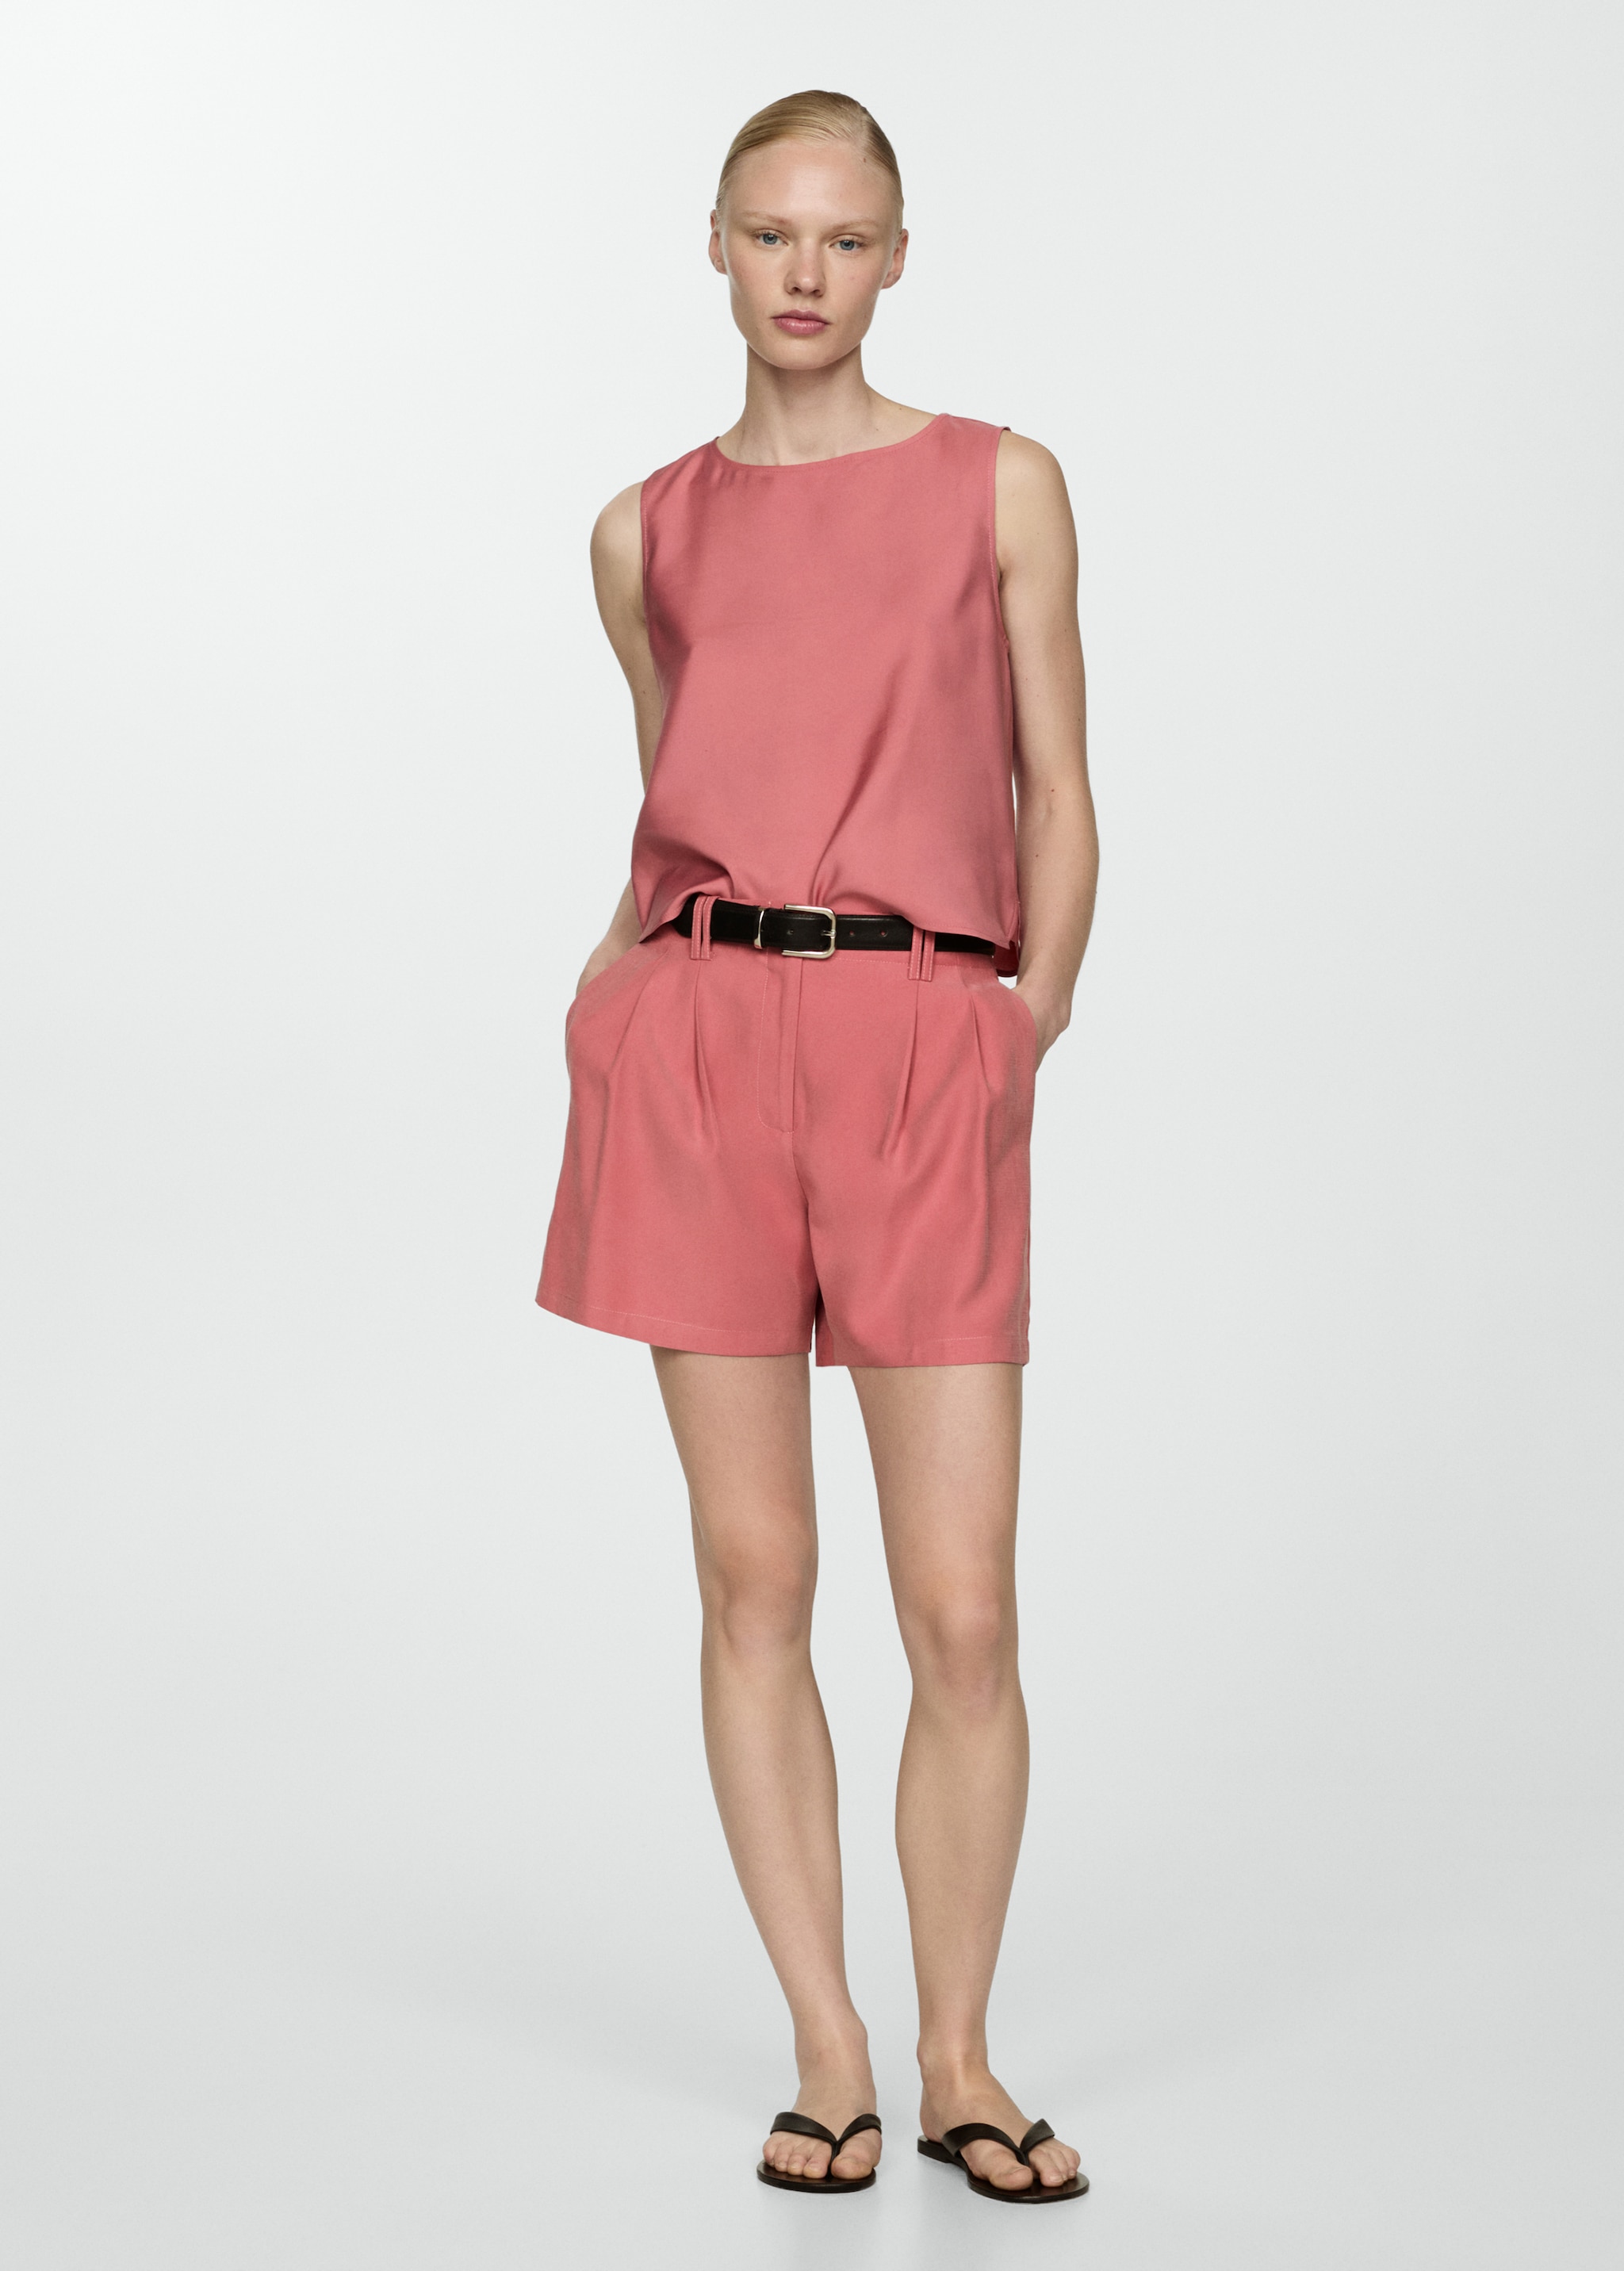 Pleated mid-rise shorts - General plane